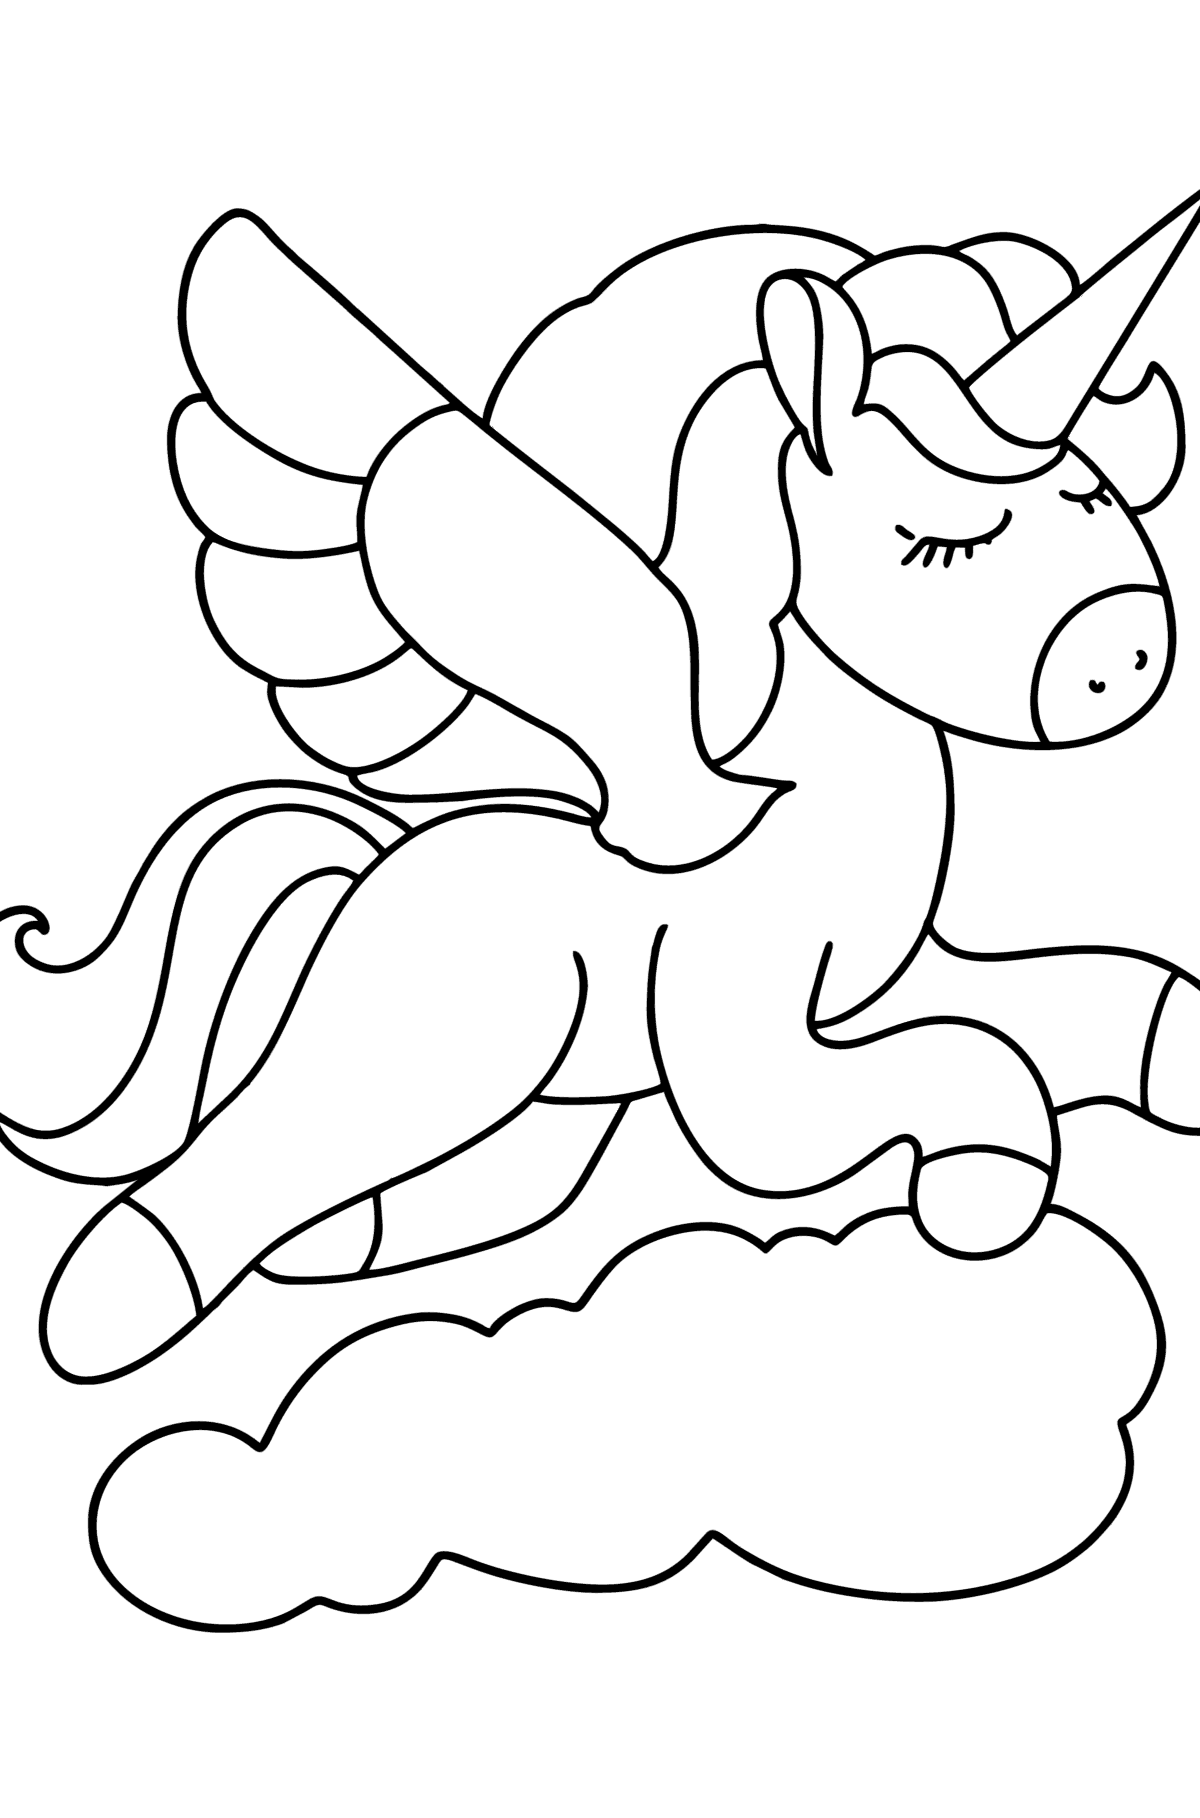 Unicorn with wings coloring page - Coloring Pages for Kids